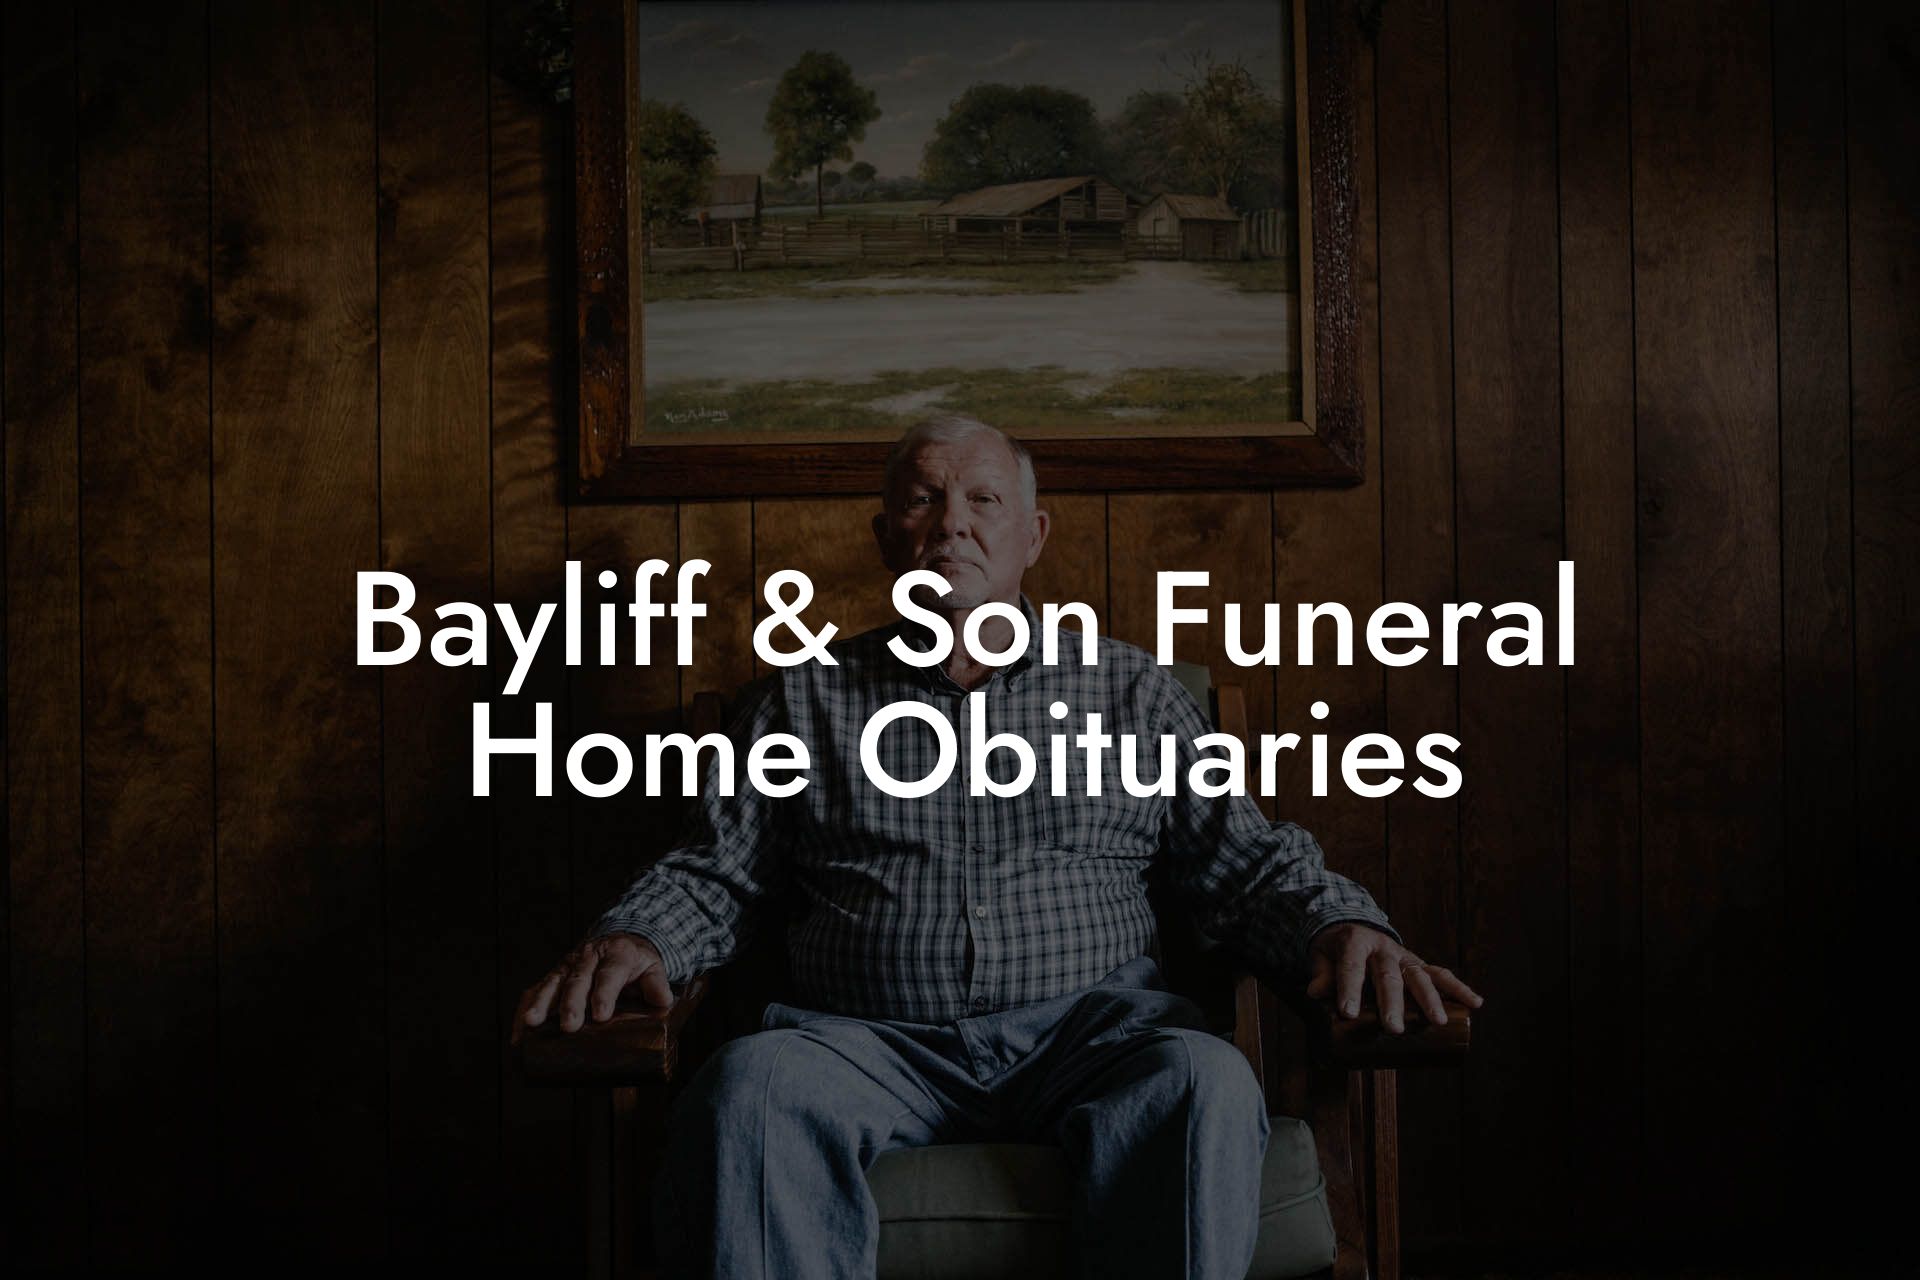 Bayliff & Son Funeral Home Obituaries